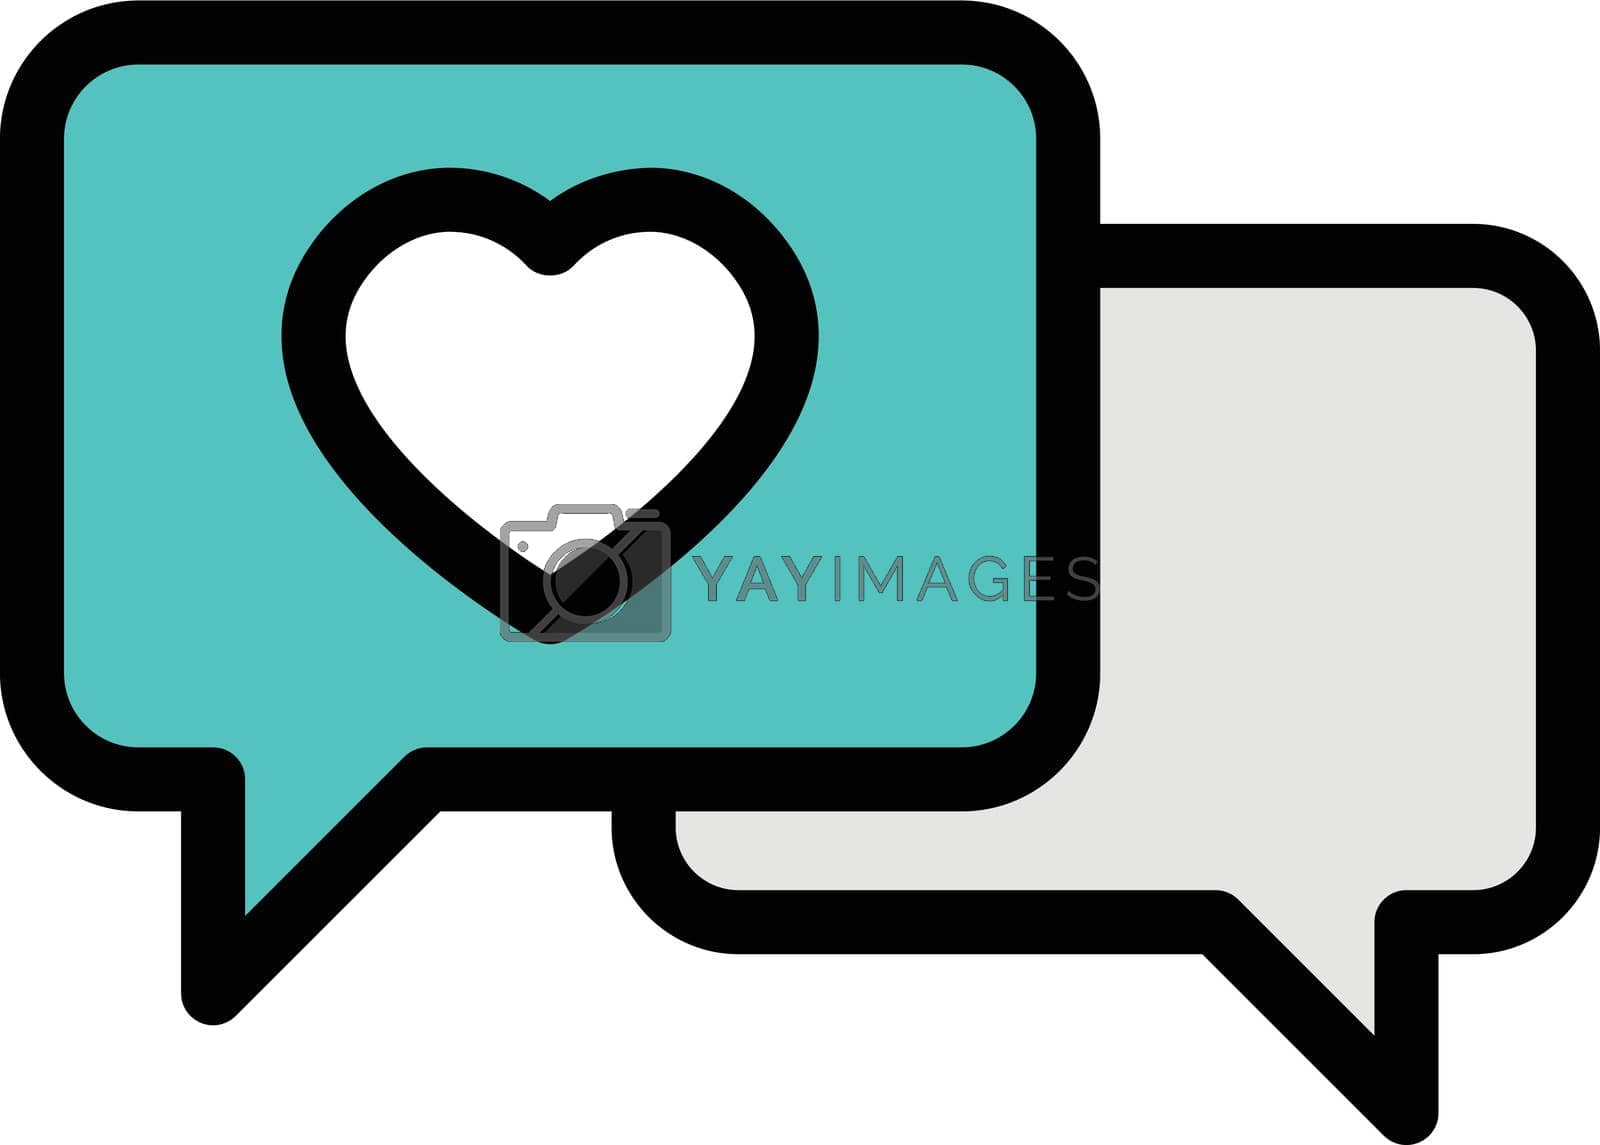 Royalty free image of chat by FlaticonsDesign